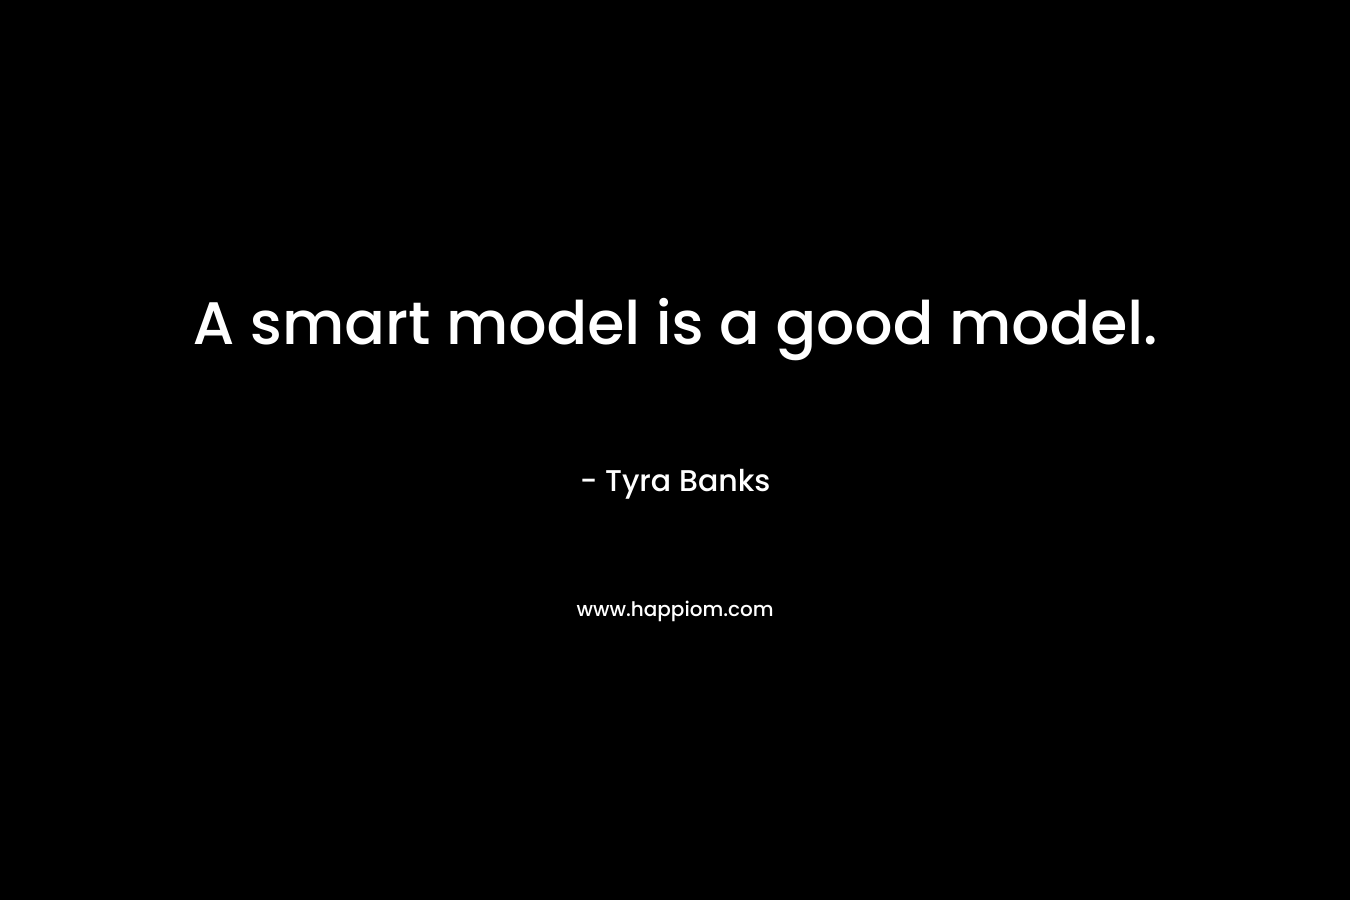 A smart model is a good model. – Tyra Banks